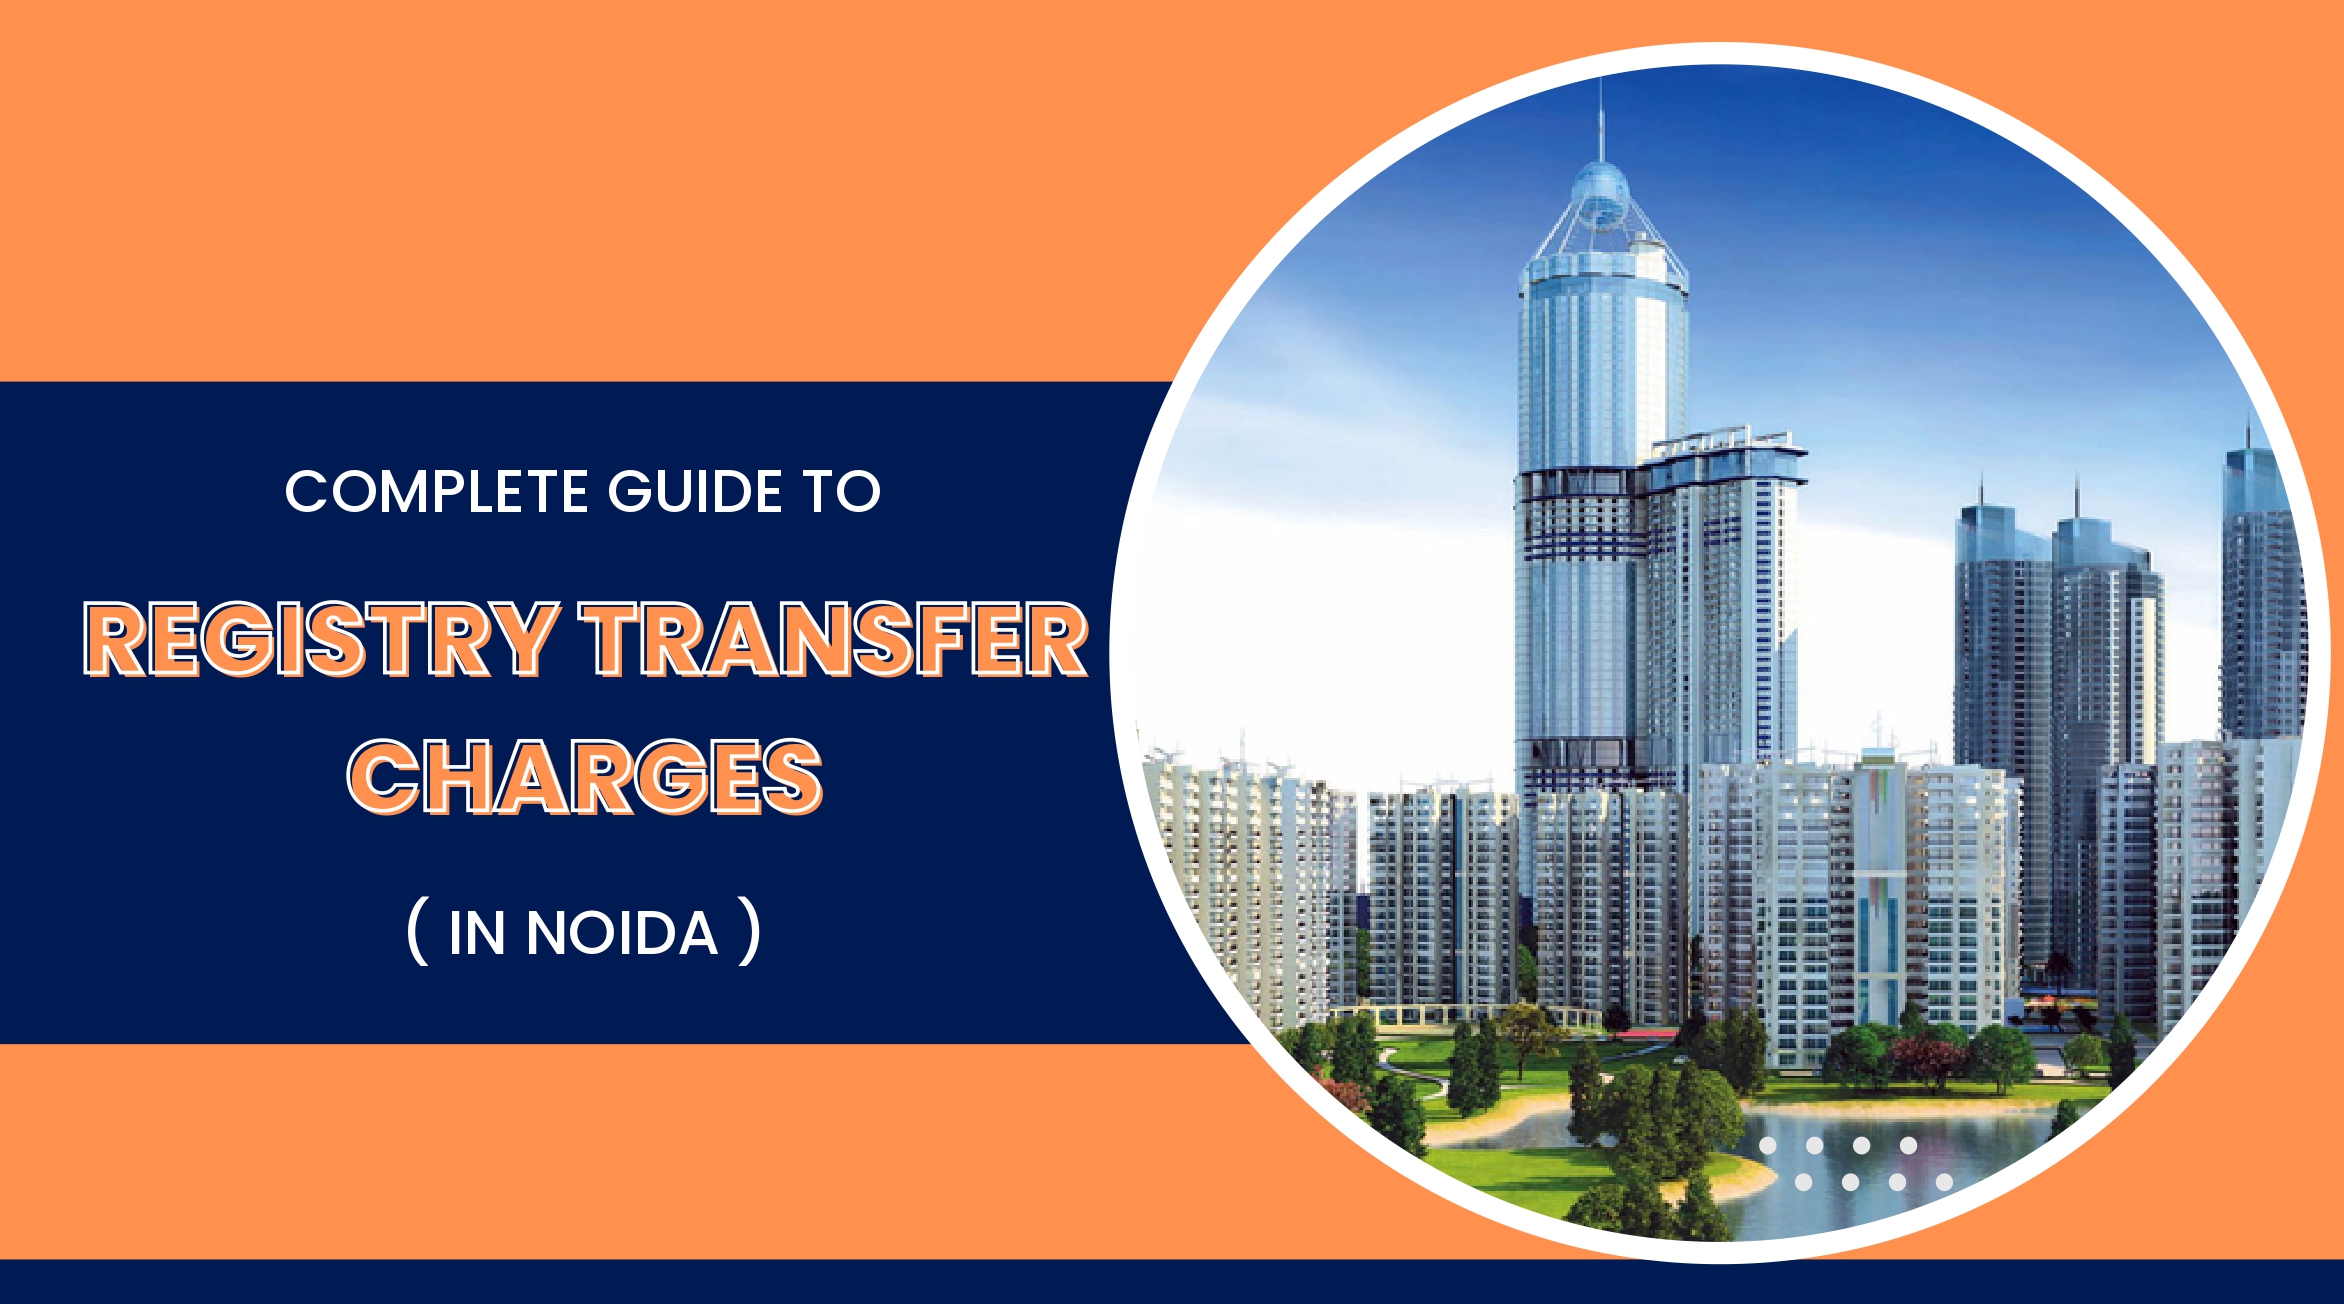 Complete Guide to Registry Transfer Charges in Noida